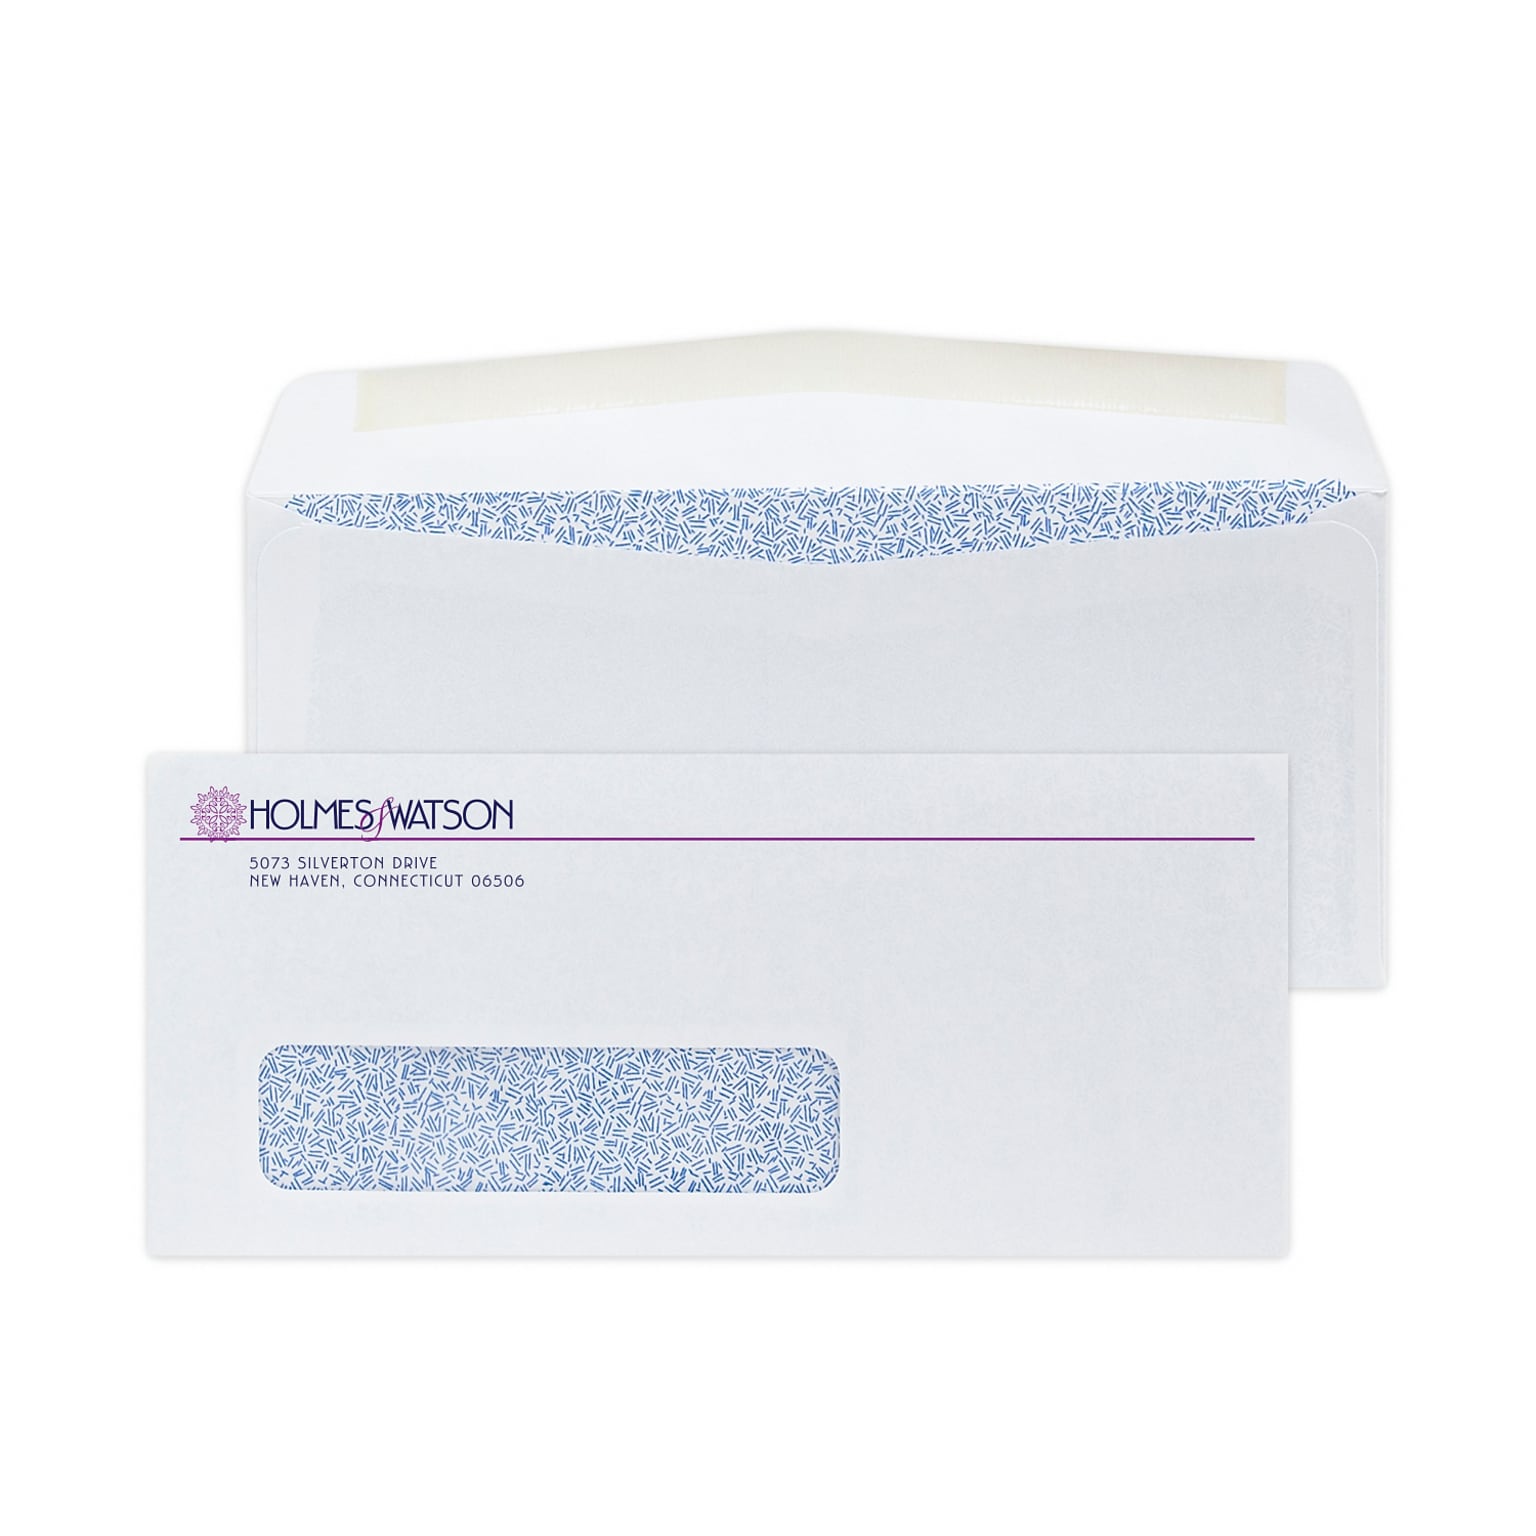 Custom #9 Window Envelopes with Security Tint, 3 7/8 x 8 7/8, 24# White Wove, 2 Custom Inks, 250 / Pack